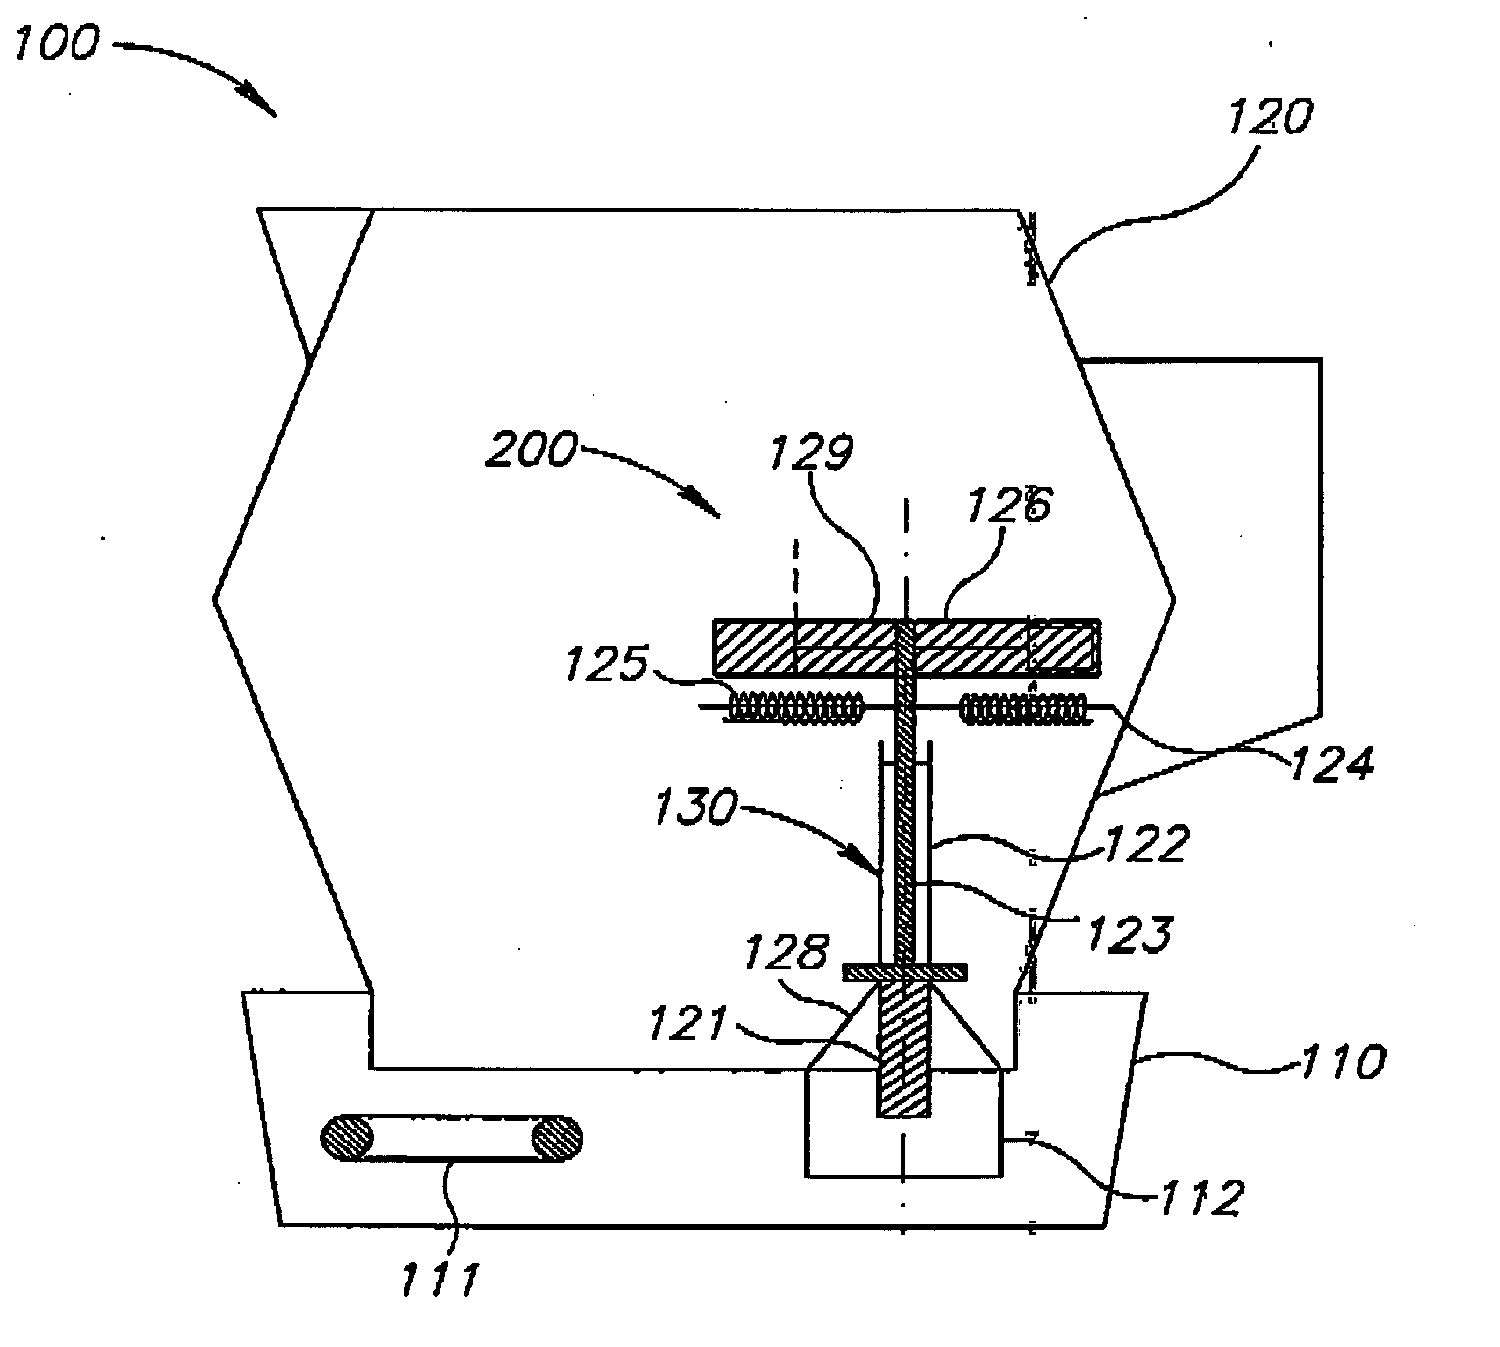 Device, system and method to heat and froth milk